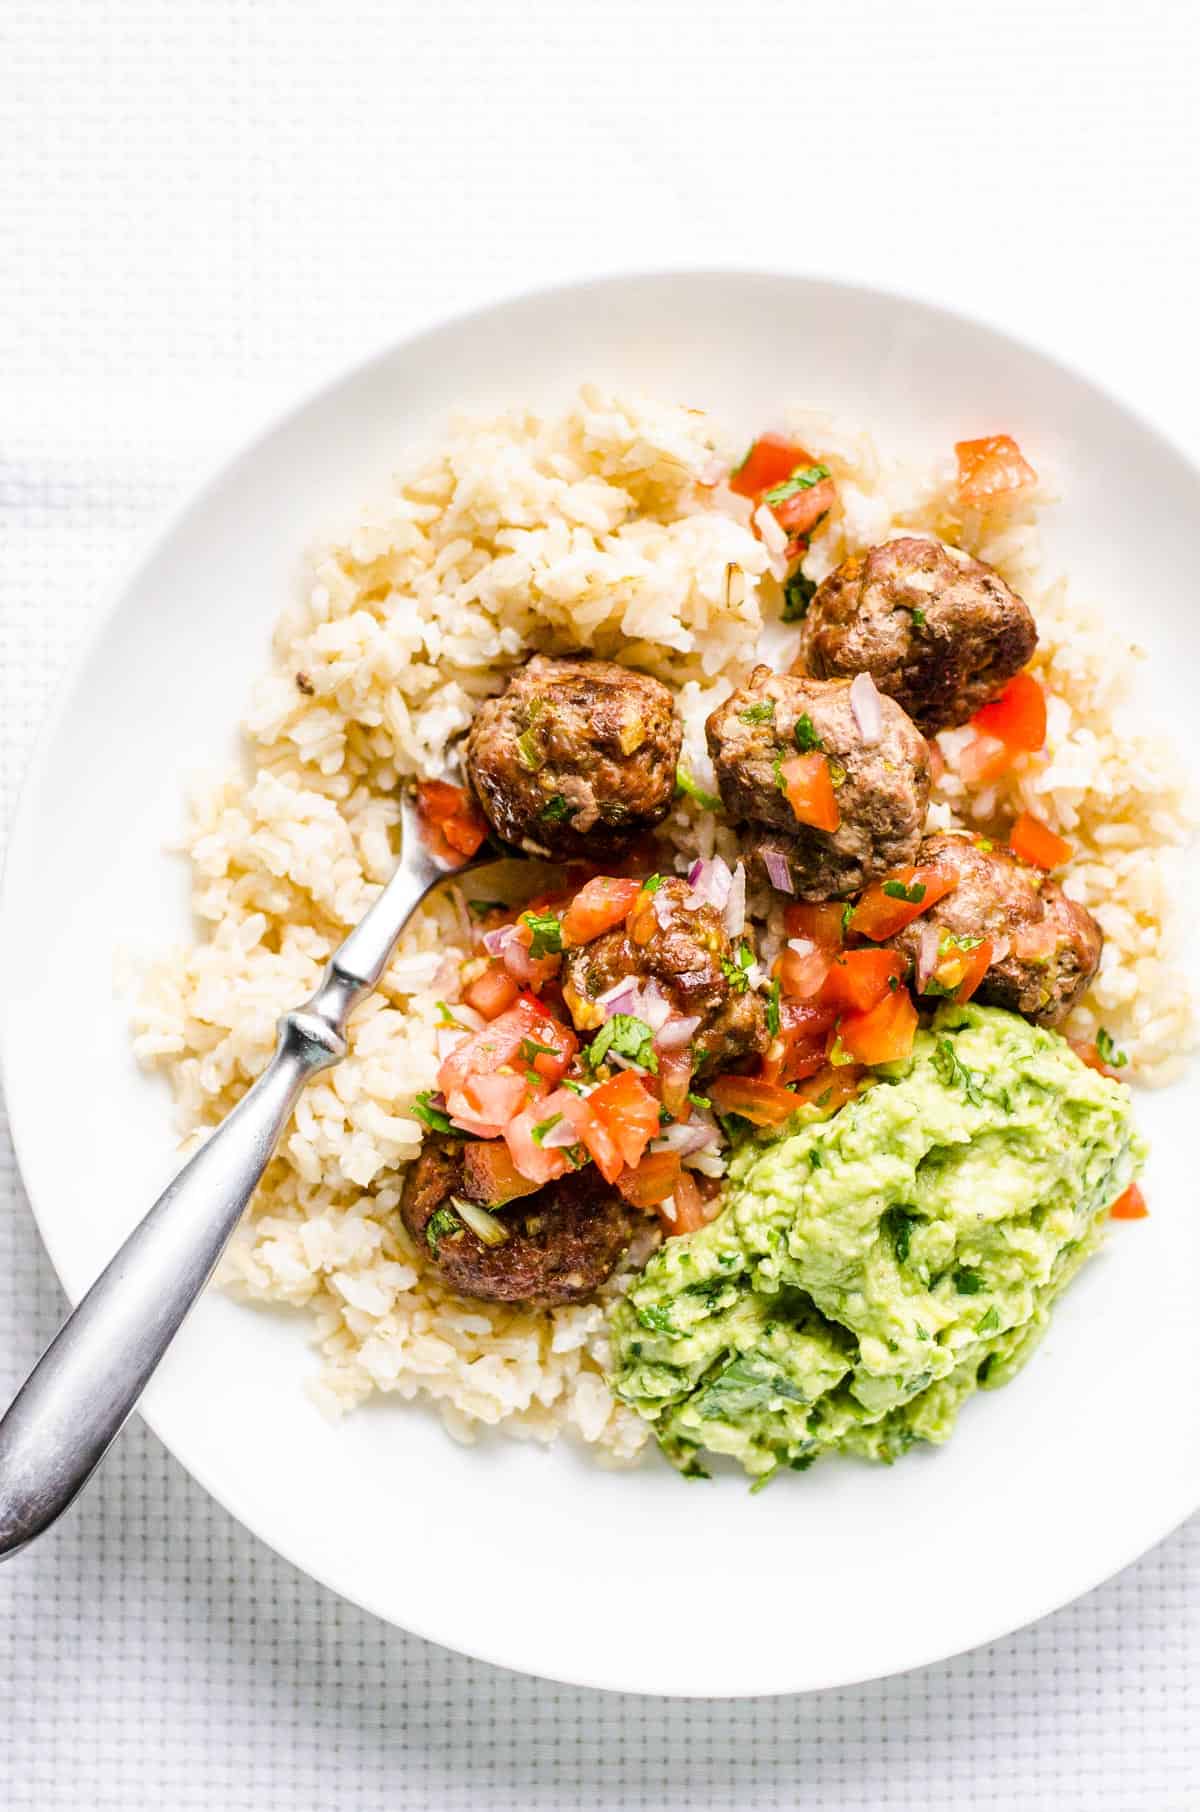 Mexican meatballs garnished with pico and served over rice on a plate.